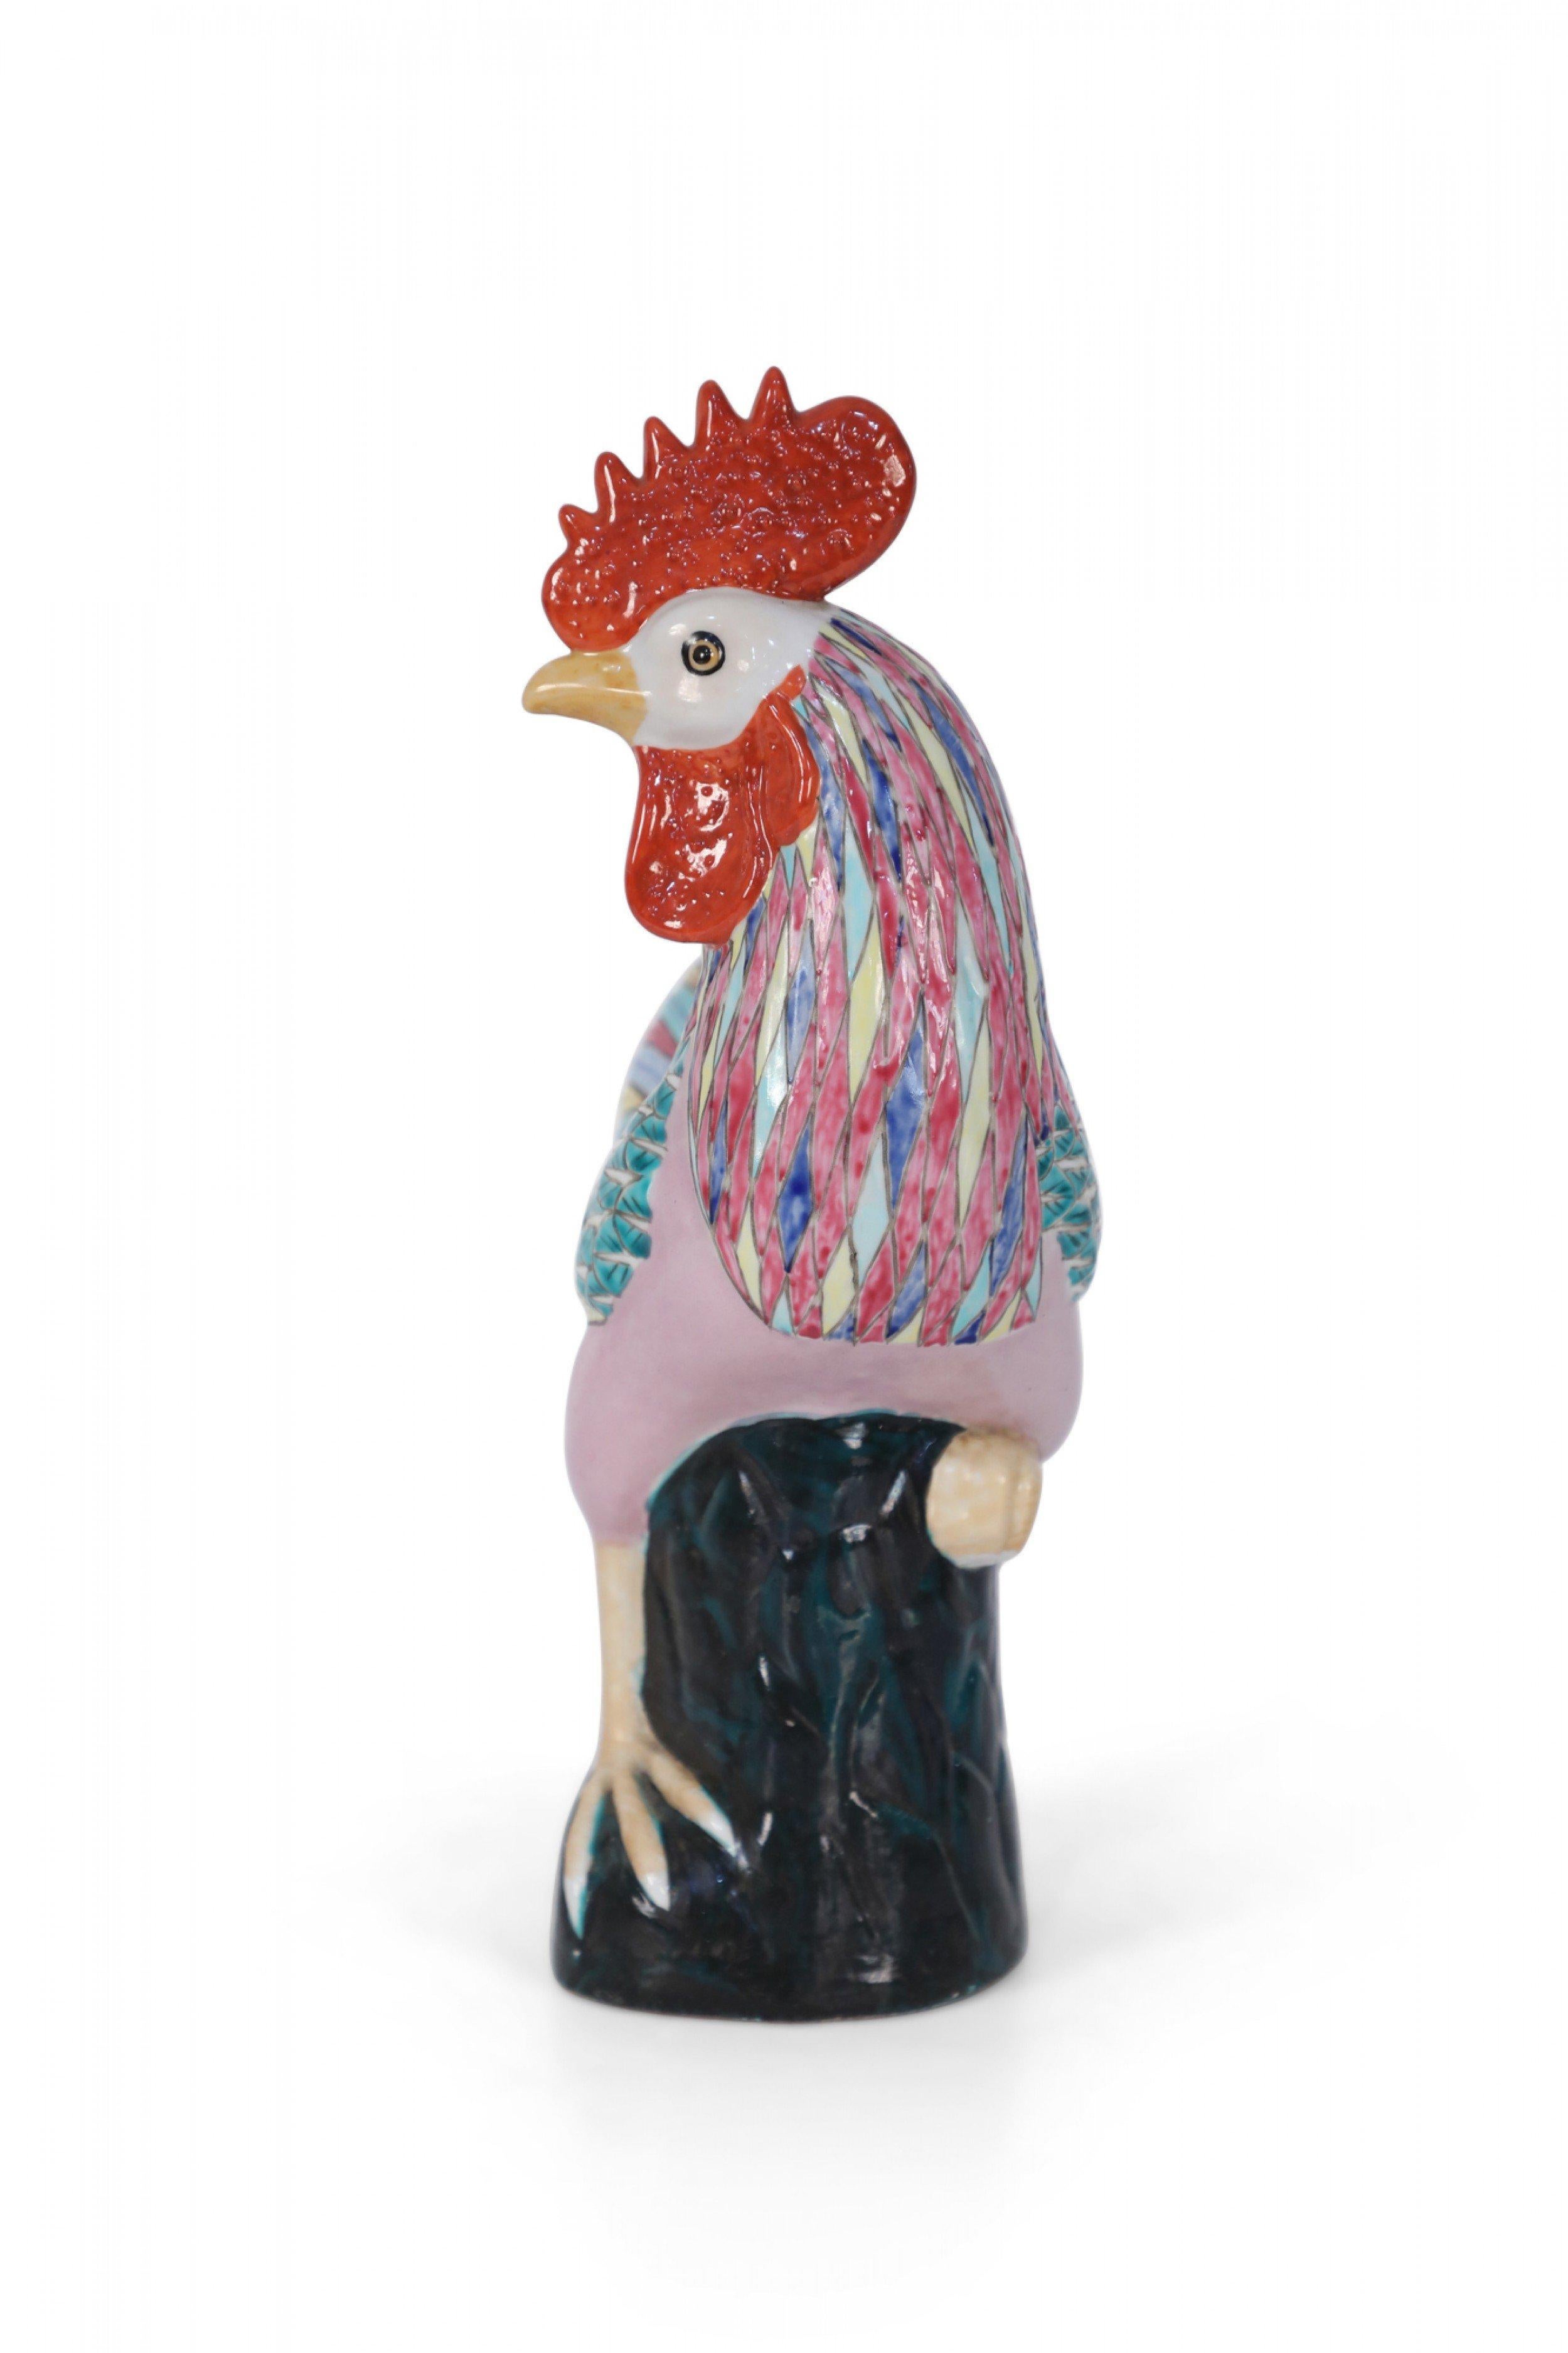 Antique Chinese porcelain chicken statue with colorful painted feathers perched on a black glazed rock.
    